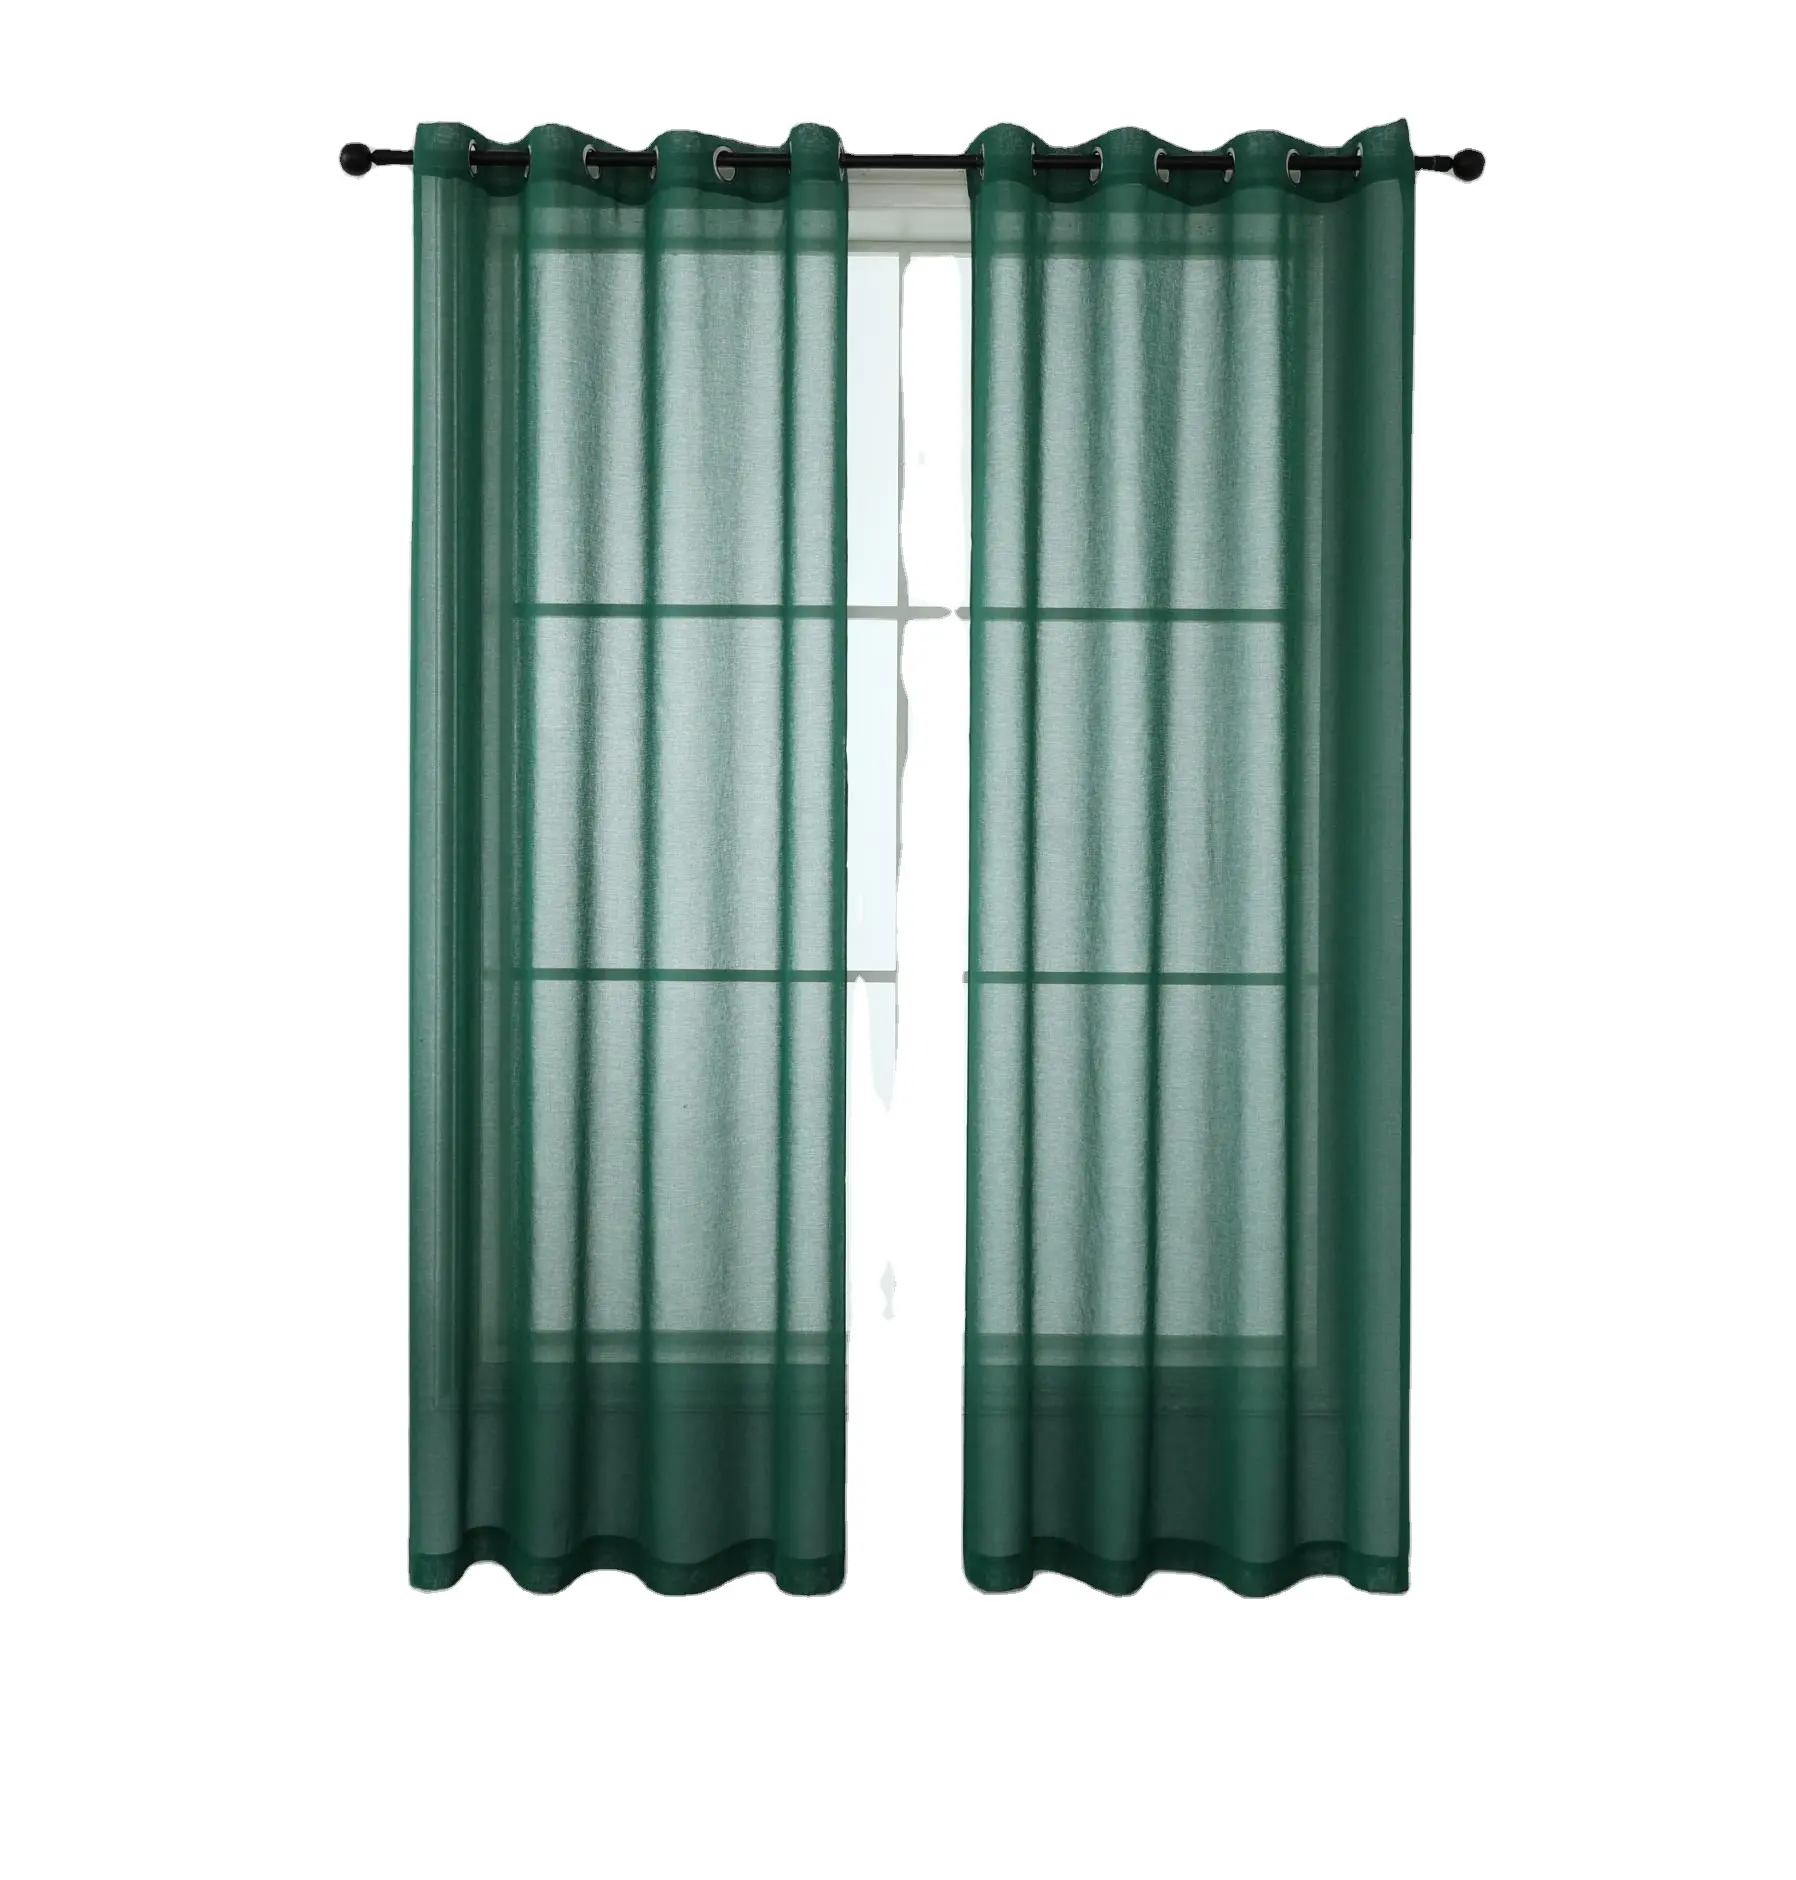 Hot Sale Cortinas Wholesale Blackout Curtain Fabric Ready Made Cloth dark green Curtains Modern For The Living Room